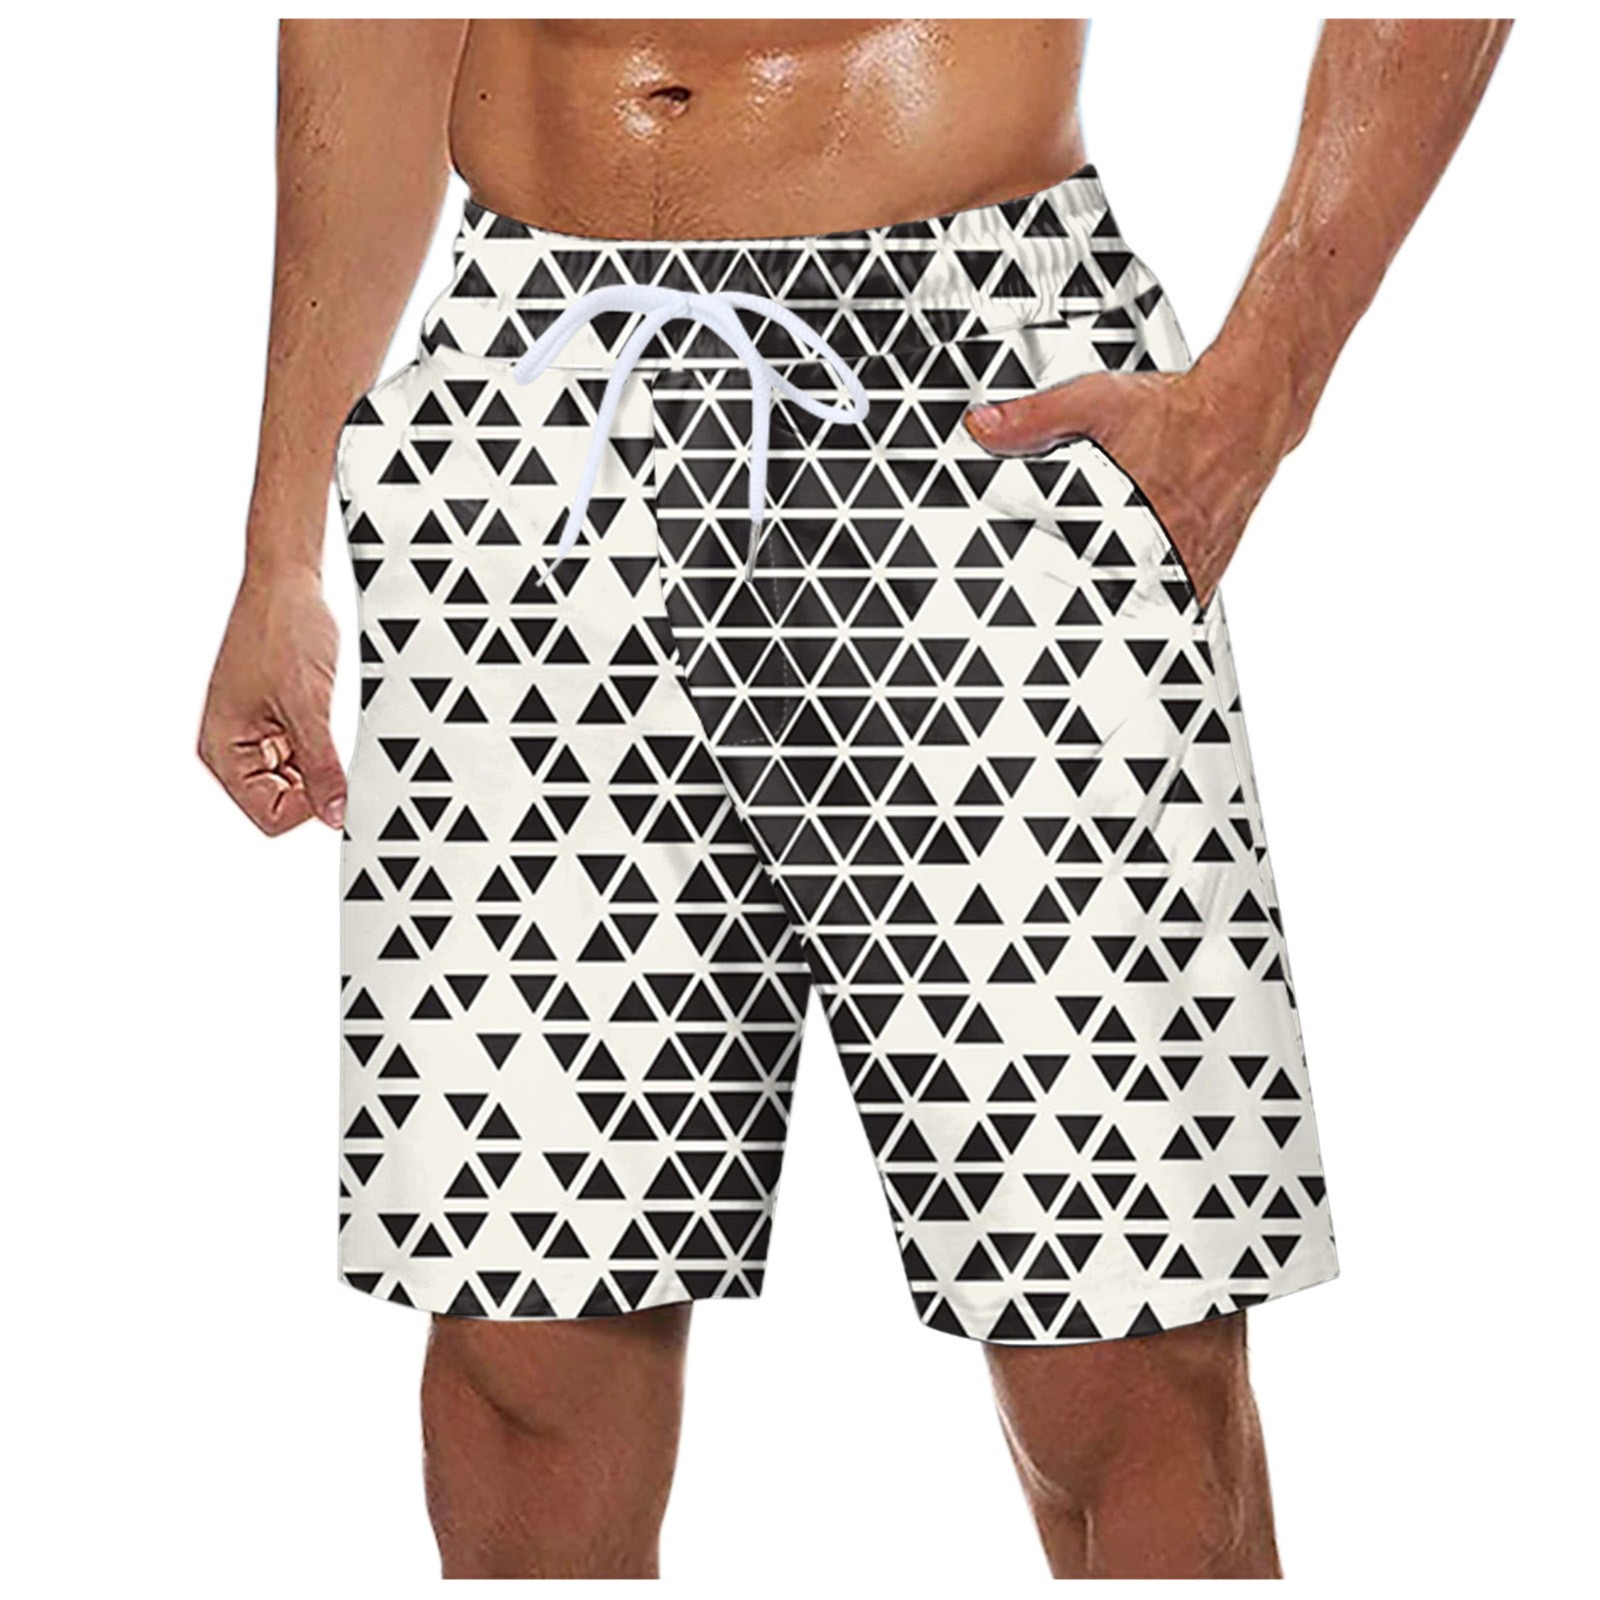 Men'S Board Shorts Summer Swimsuit Mesh Lined With Shorts And Pockets ...